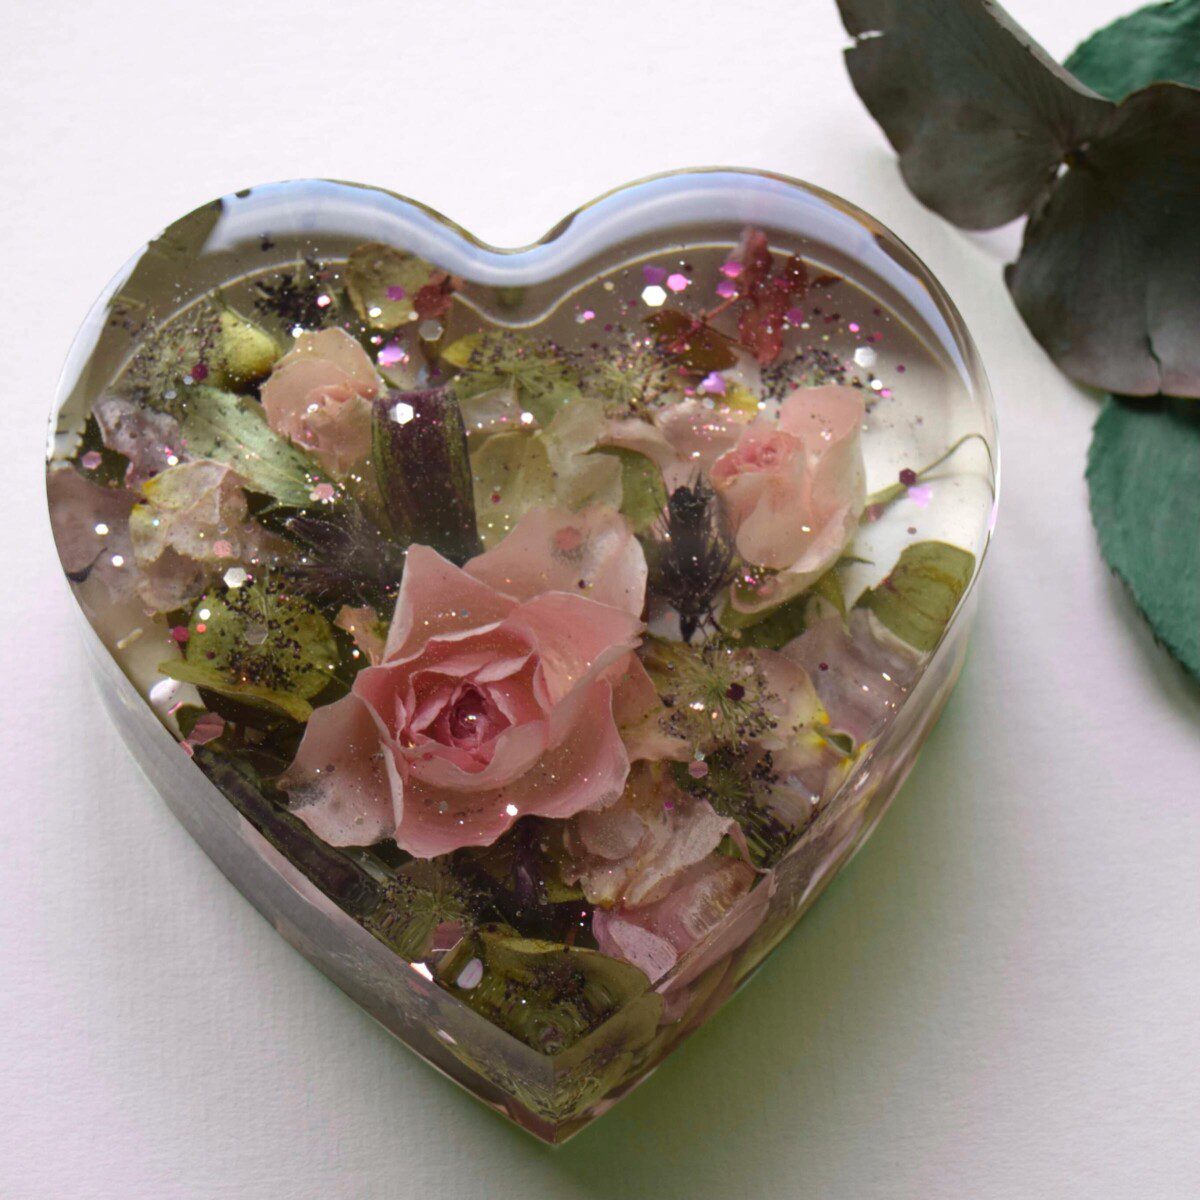 Resin heart with preserved wedding flowers